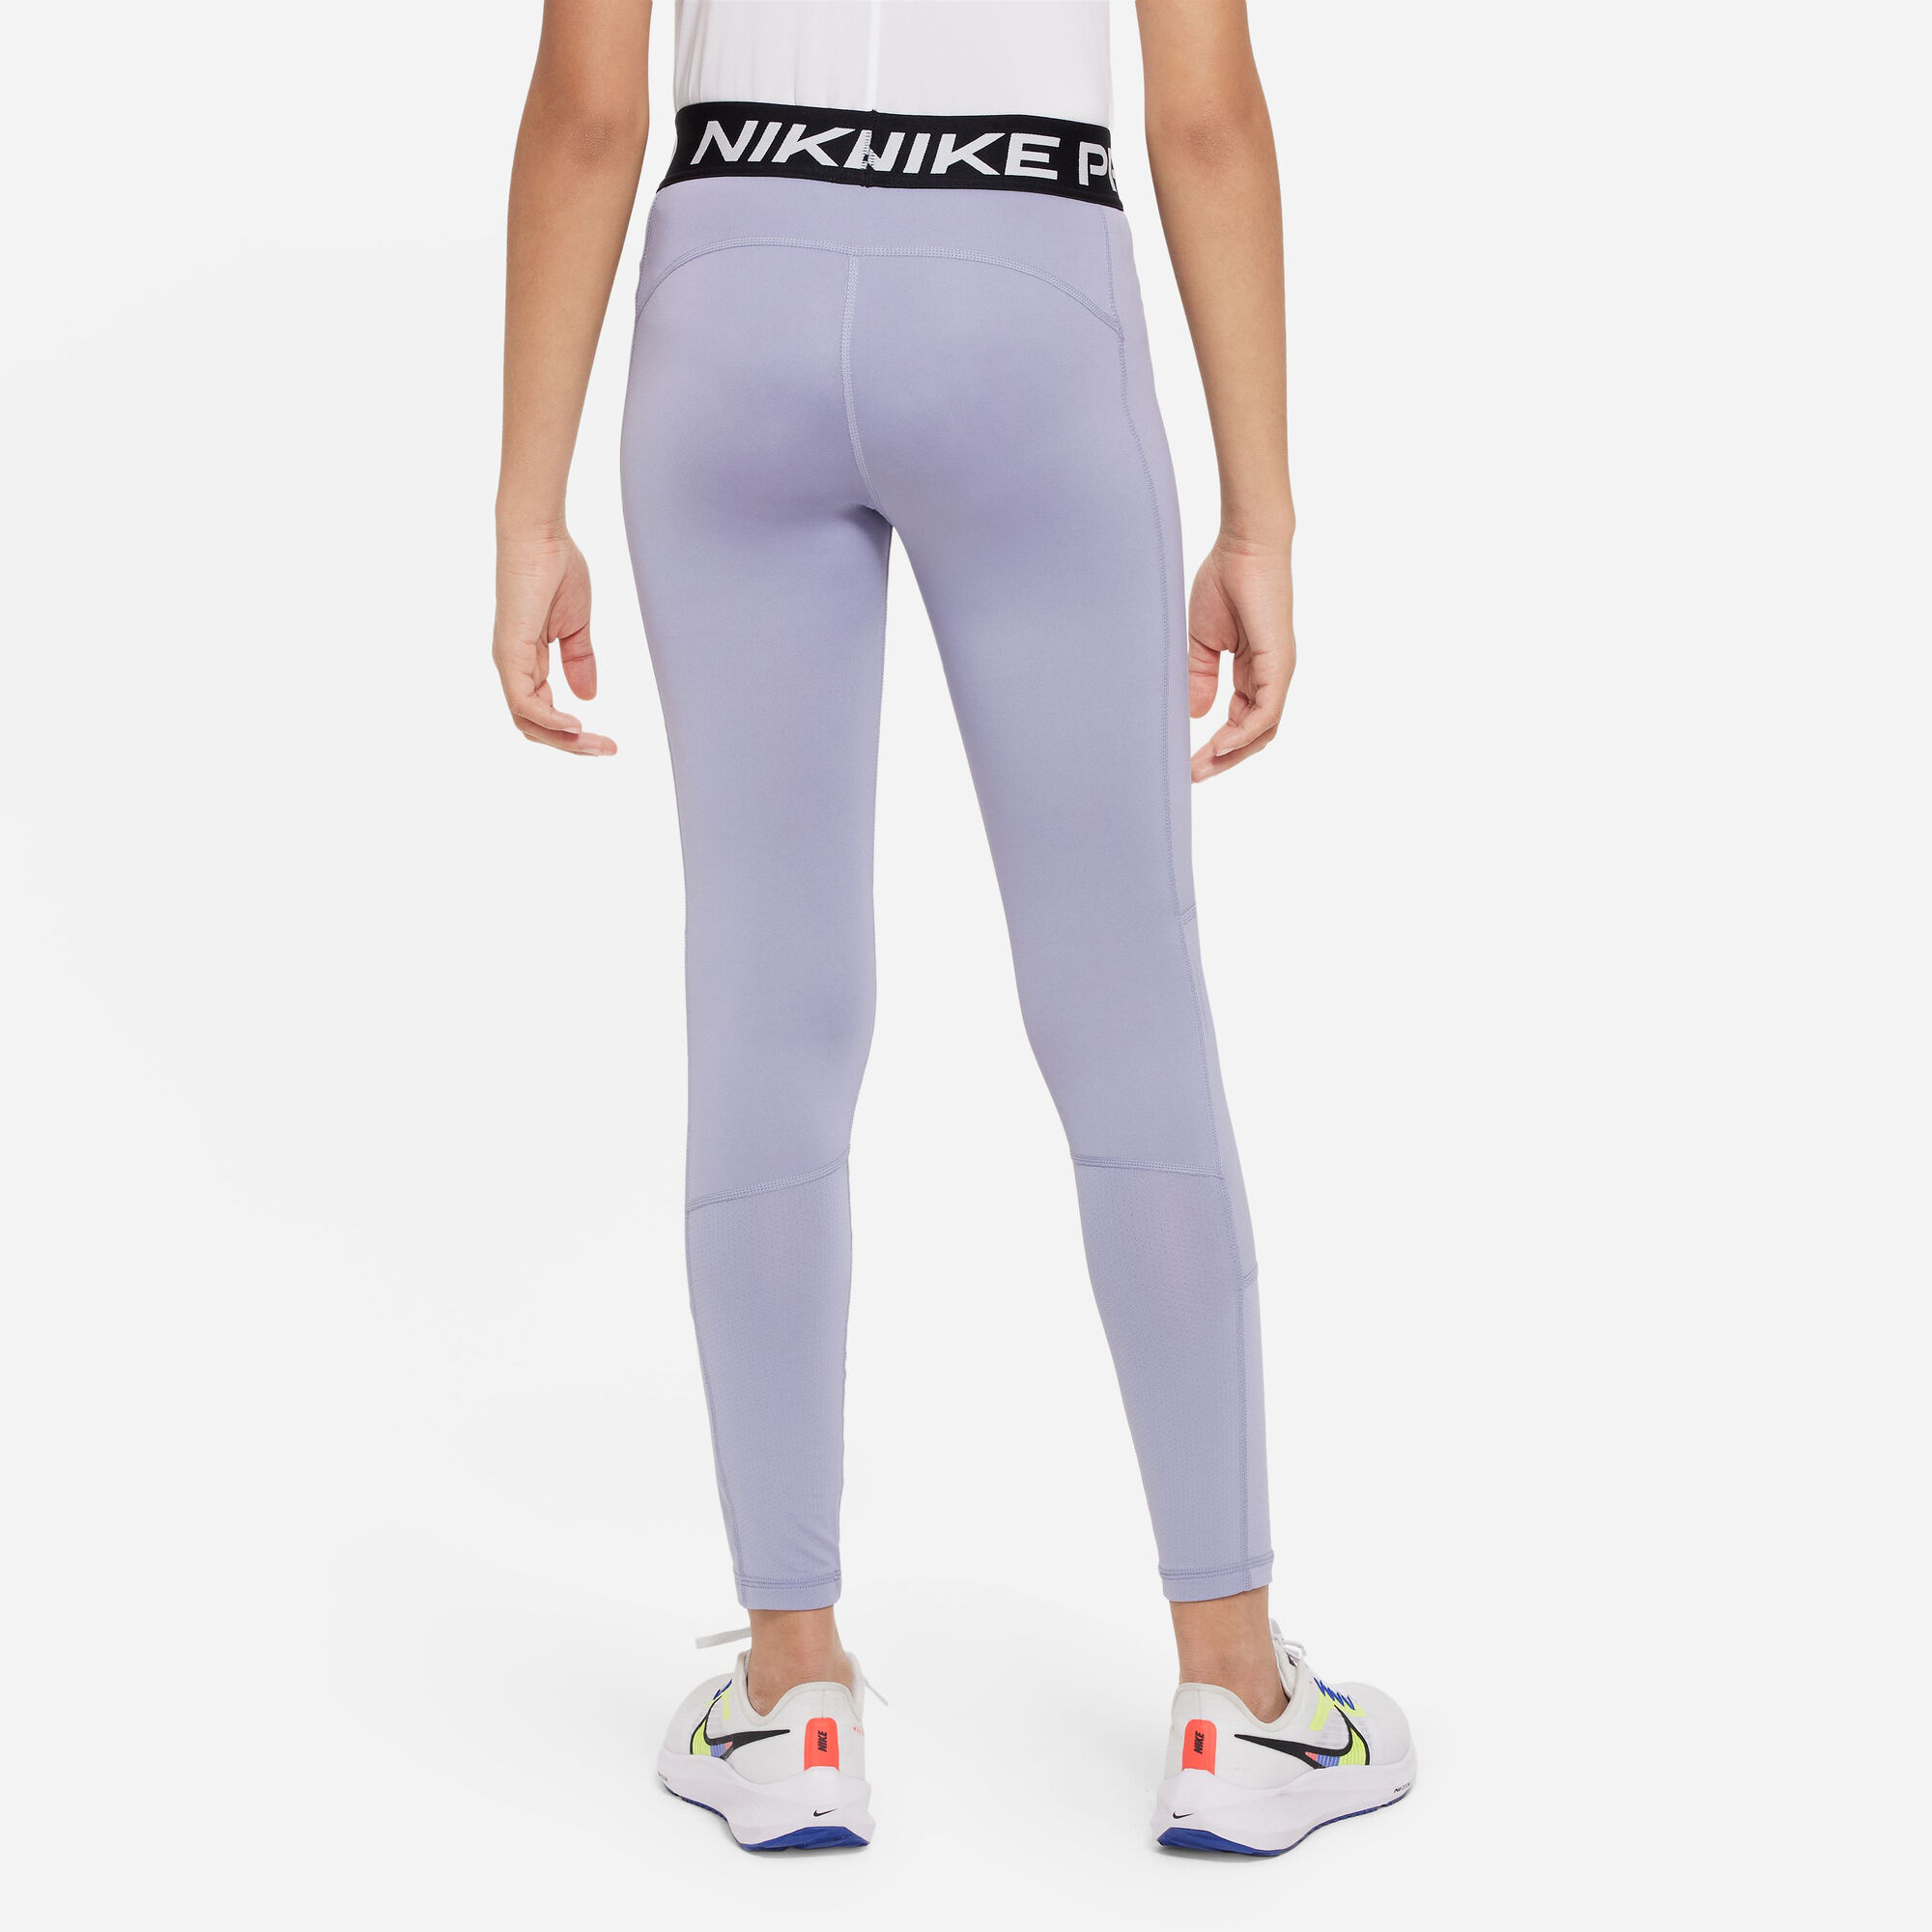 Buy Nike Pro Tight Girls Lilac online